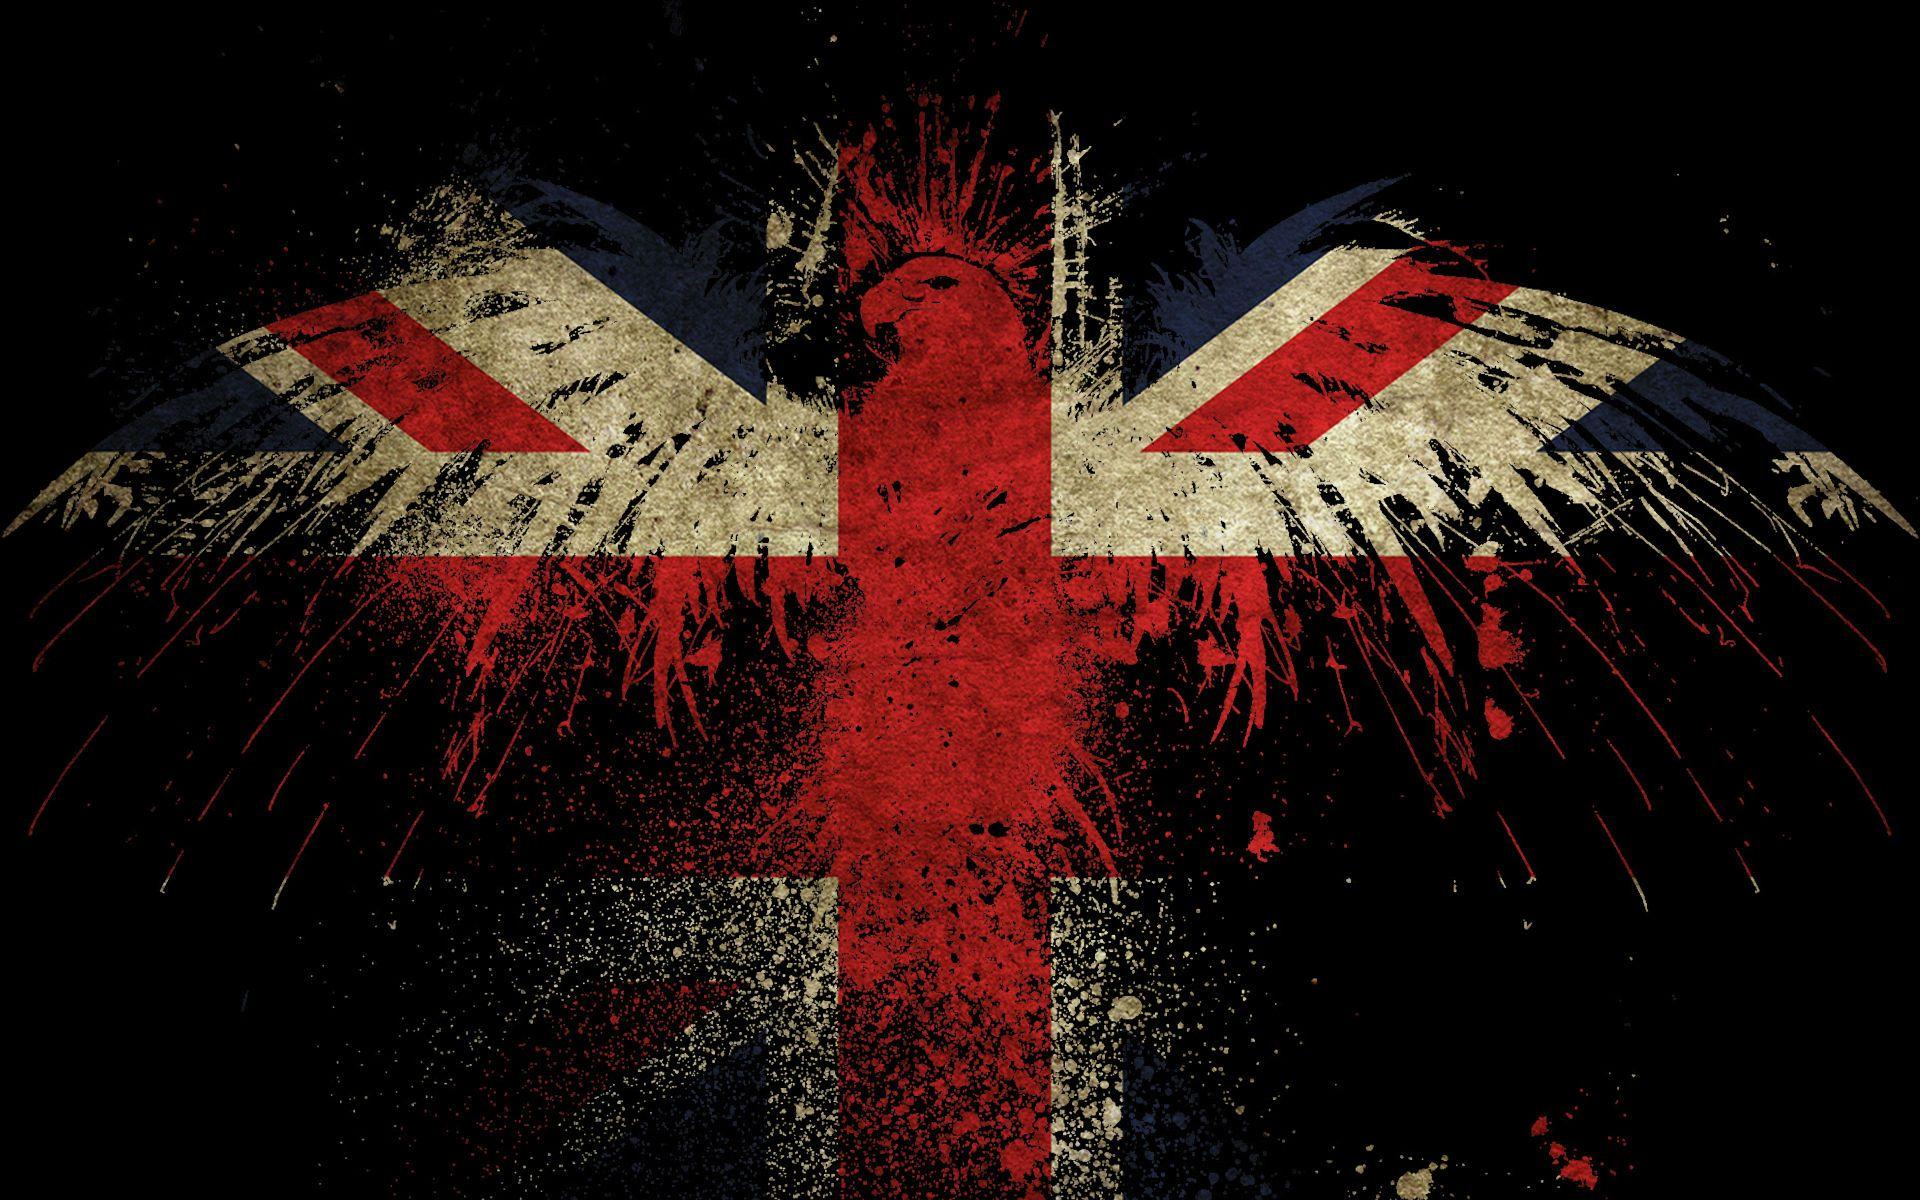 British Flag Hd Wallpapers Top Free British Flag Hd Backgrounds